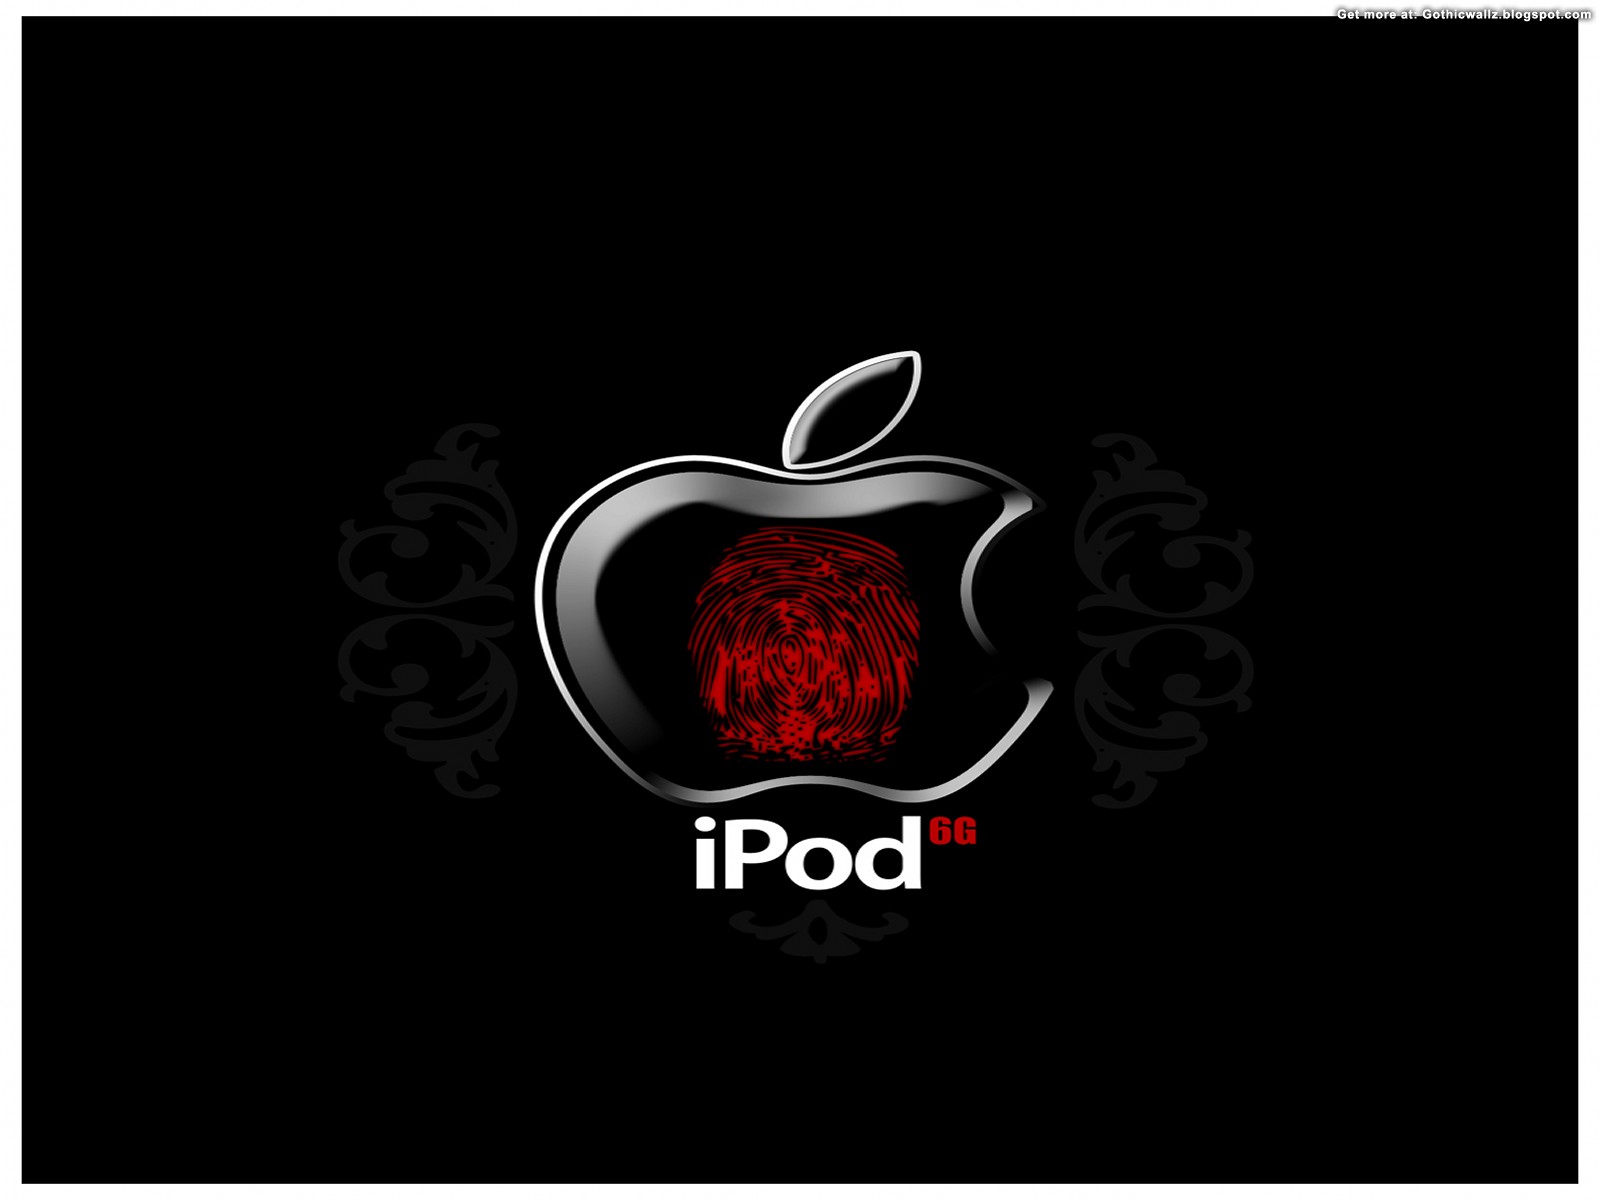 HD Wallpapers For Apple iPodHD Wallpapers 1600x1200